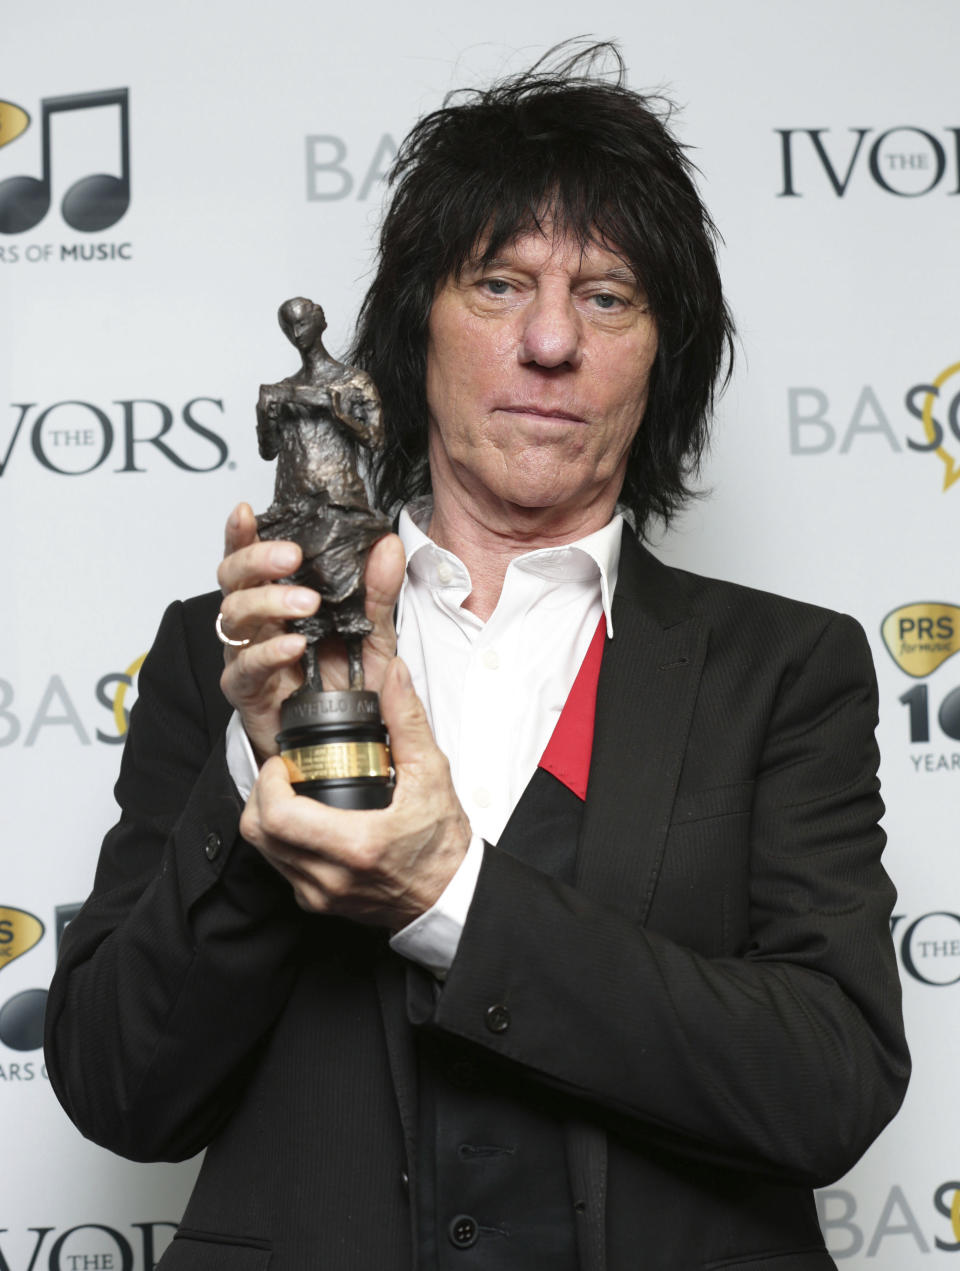 FILE - Jeff Beck holds his Outstanding Contribution to British Music award, at the 59th annual Ivor Novello Awards, at Grosvenor House, in London, on May 22, 2014. Renowned rock guitarist Beck, known for his work with the Yardbirds and the Jeff Beck Group, has died Tuesday, Jan. 10, 2023, at the age of 78, his representatives said Wednesday. (Yui Mok/PA via AP)